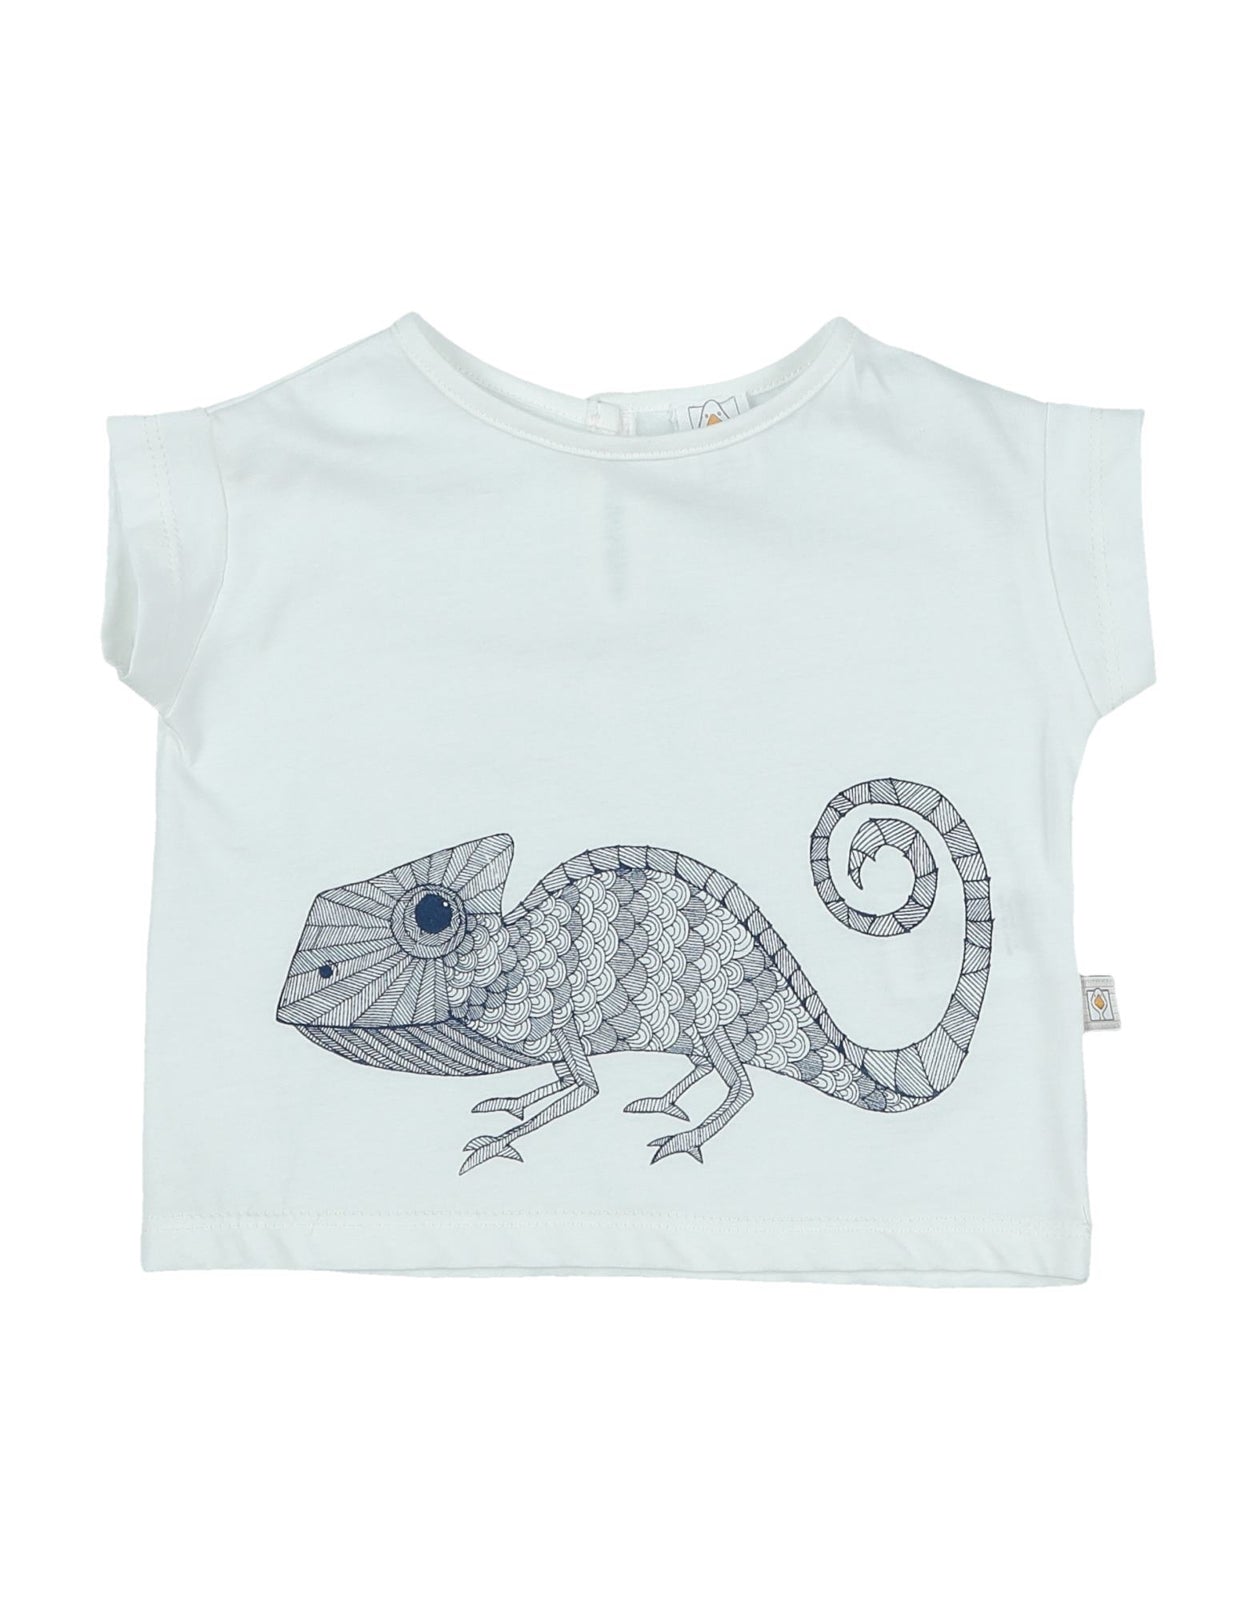 FILOBIO T-Shirt  Top Size 3M / 60CM Coated Chameleon Front Made in Italy gallery main photo